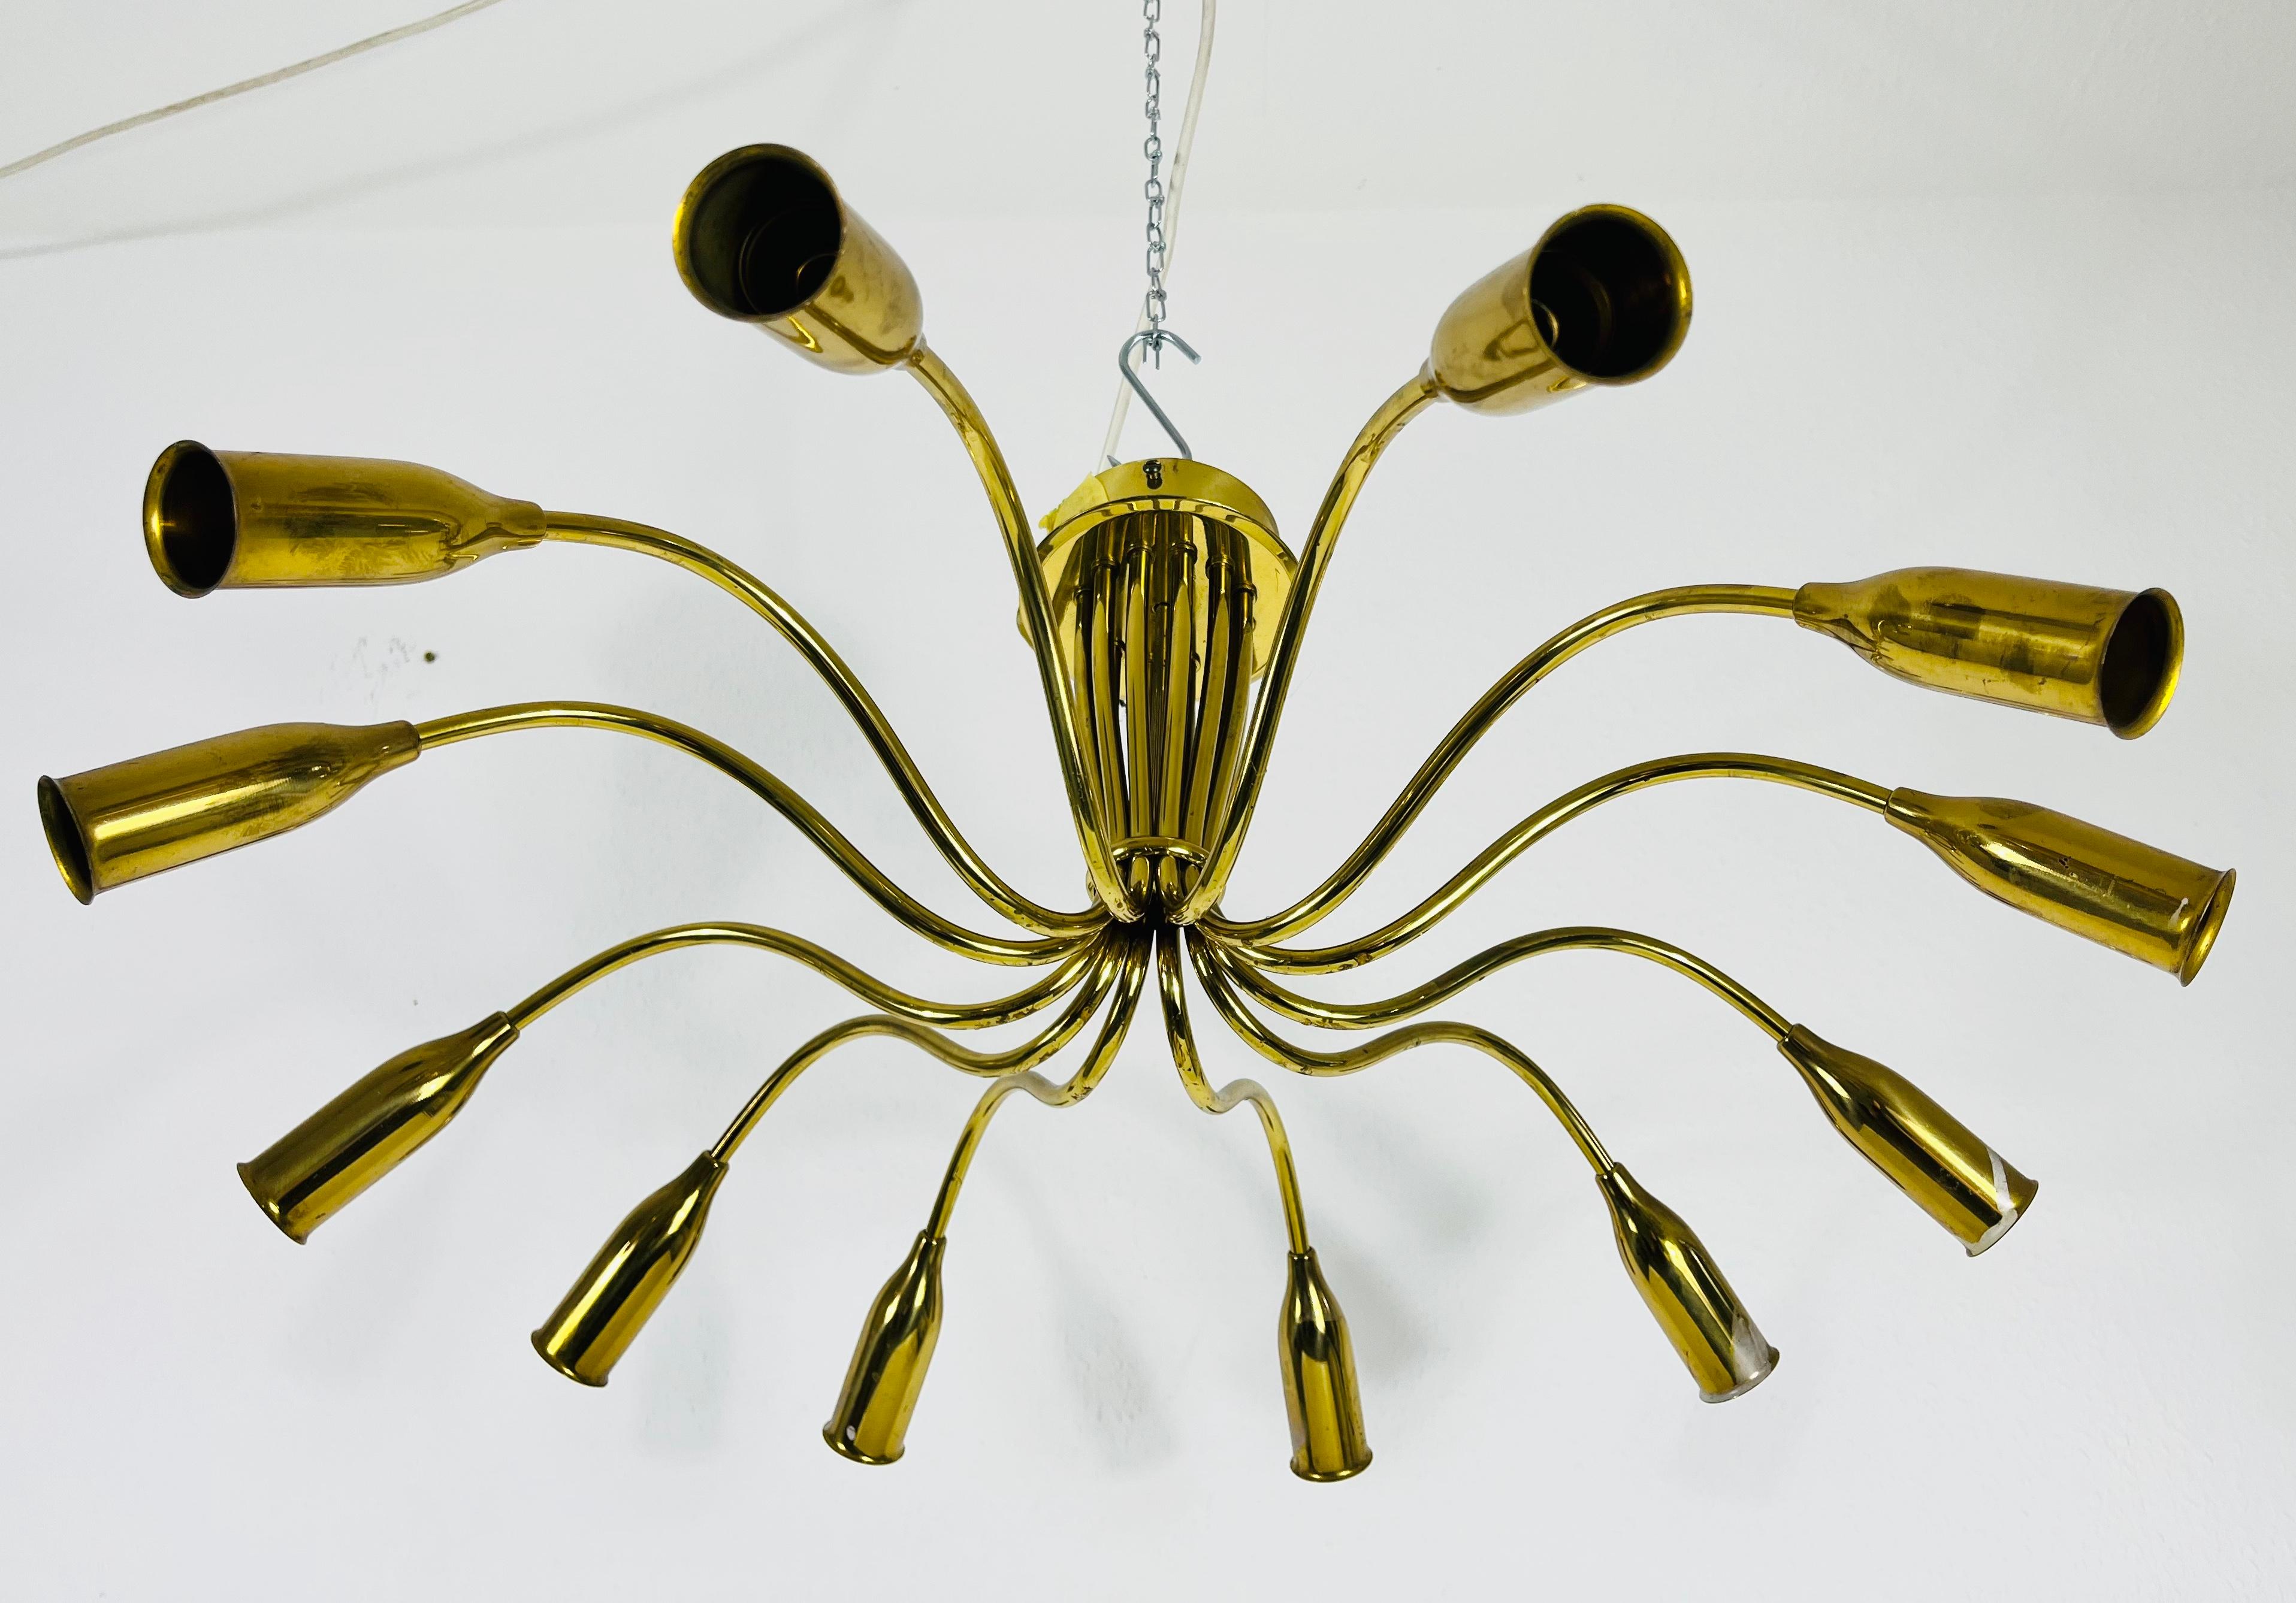 A Sputnik chandelier made in Italy in the 1950s. It is fascinating with its twelve brass arms, each of it with an E14 light bulb. The shape of the light is similar to a spider.

The light requires 10 E14 light bulbs. Works with both 120/220V. Good